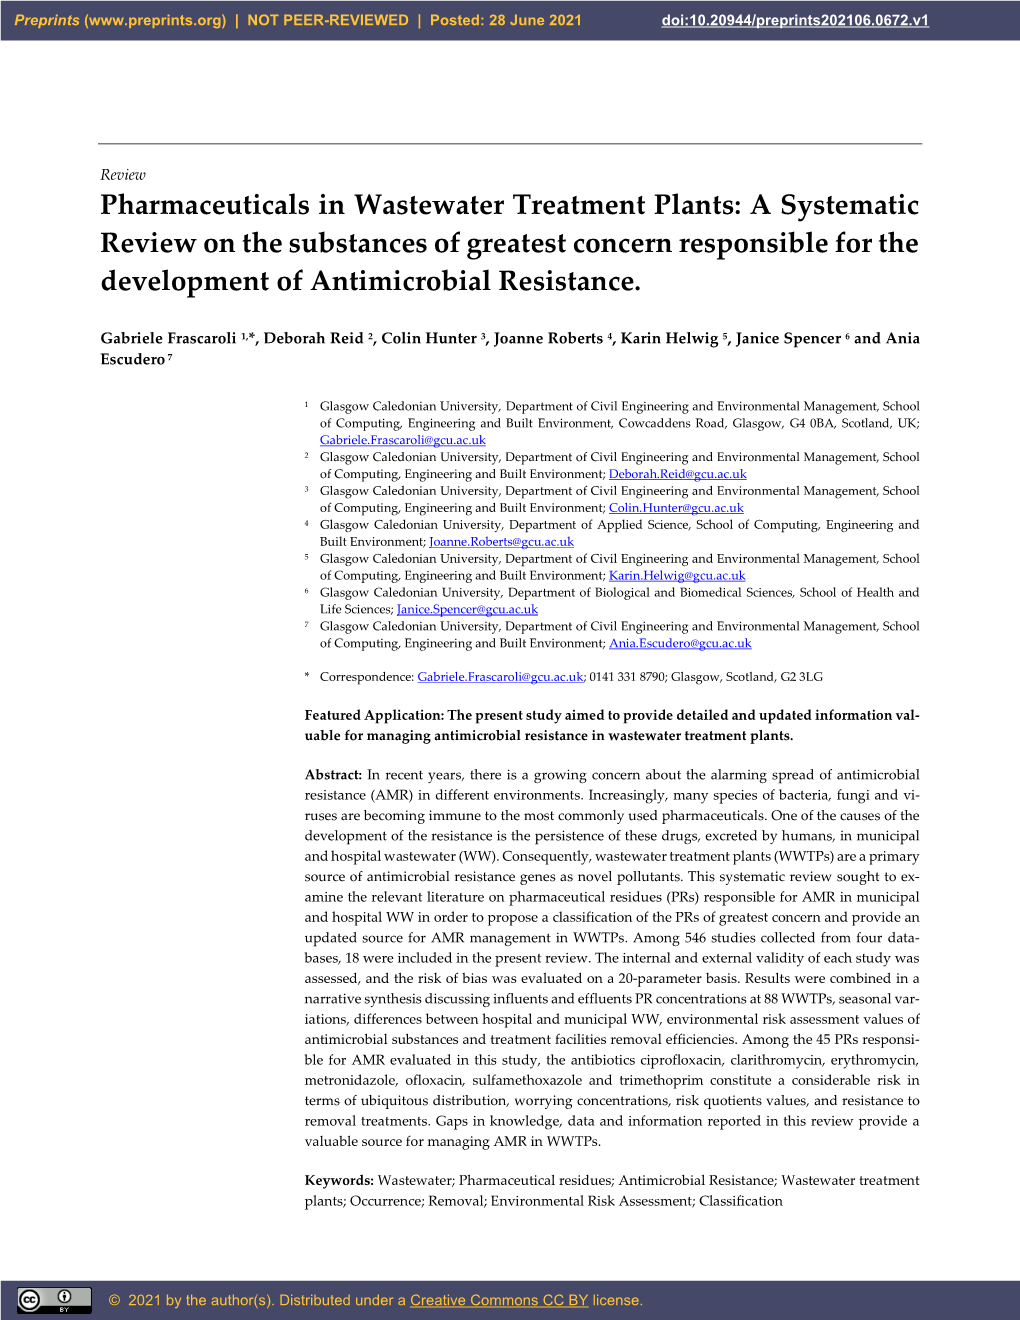 Pharmaceuticals in Wastewater Treatment Plants: a Systematic Review on the Substances of Greatest Concern Responsible for the Development of Antimicrobial Resistance